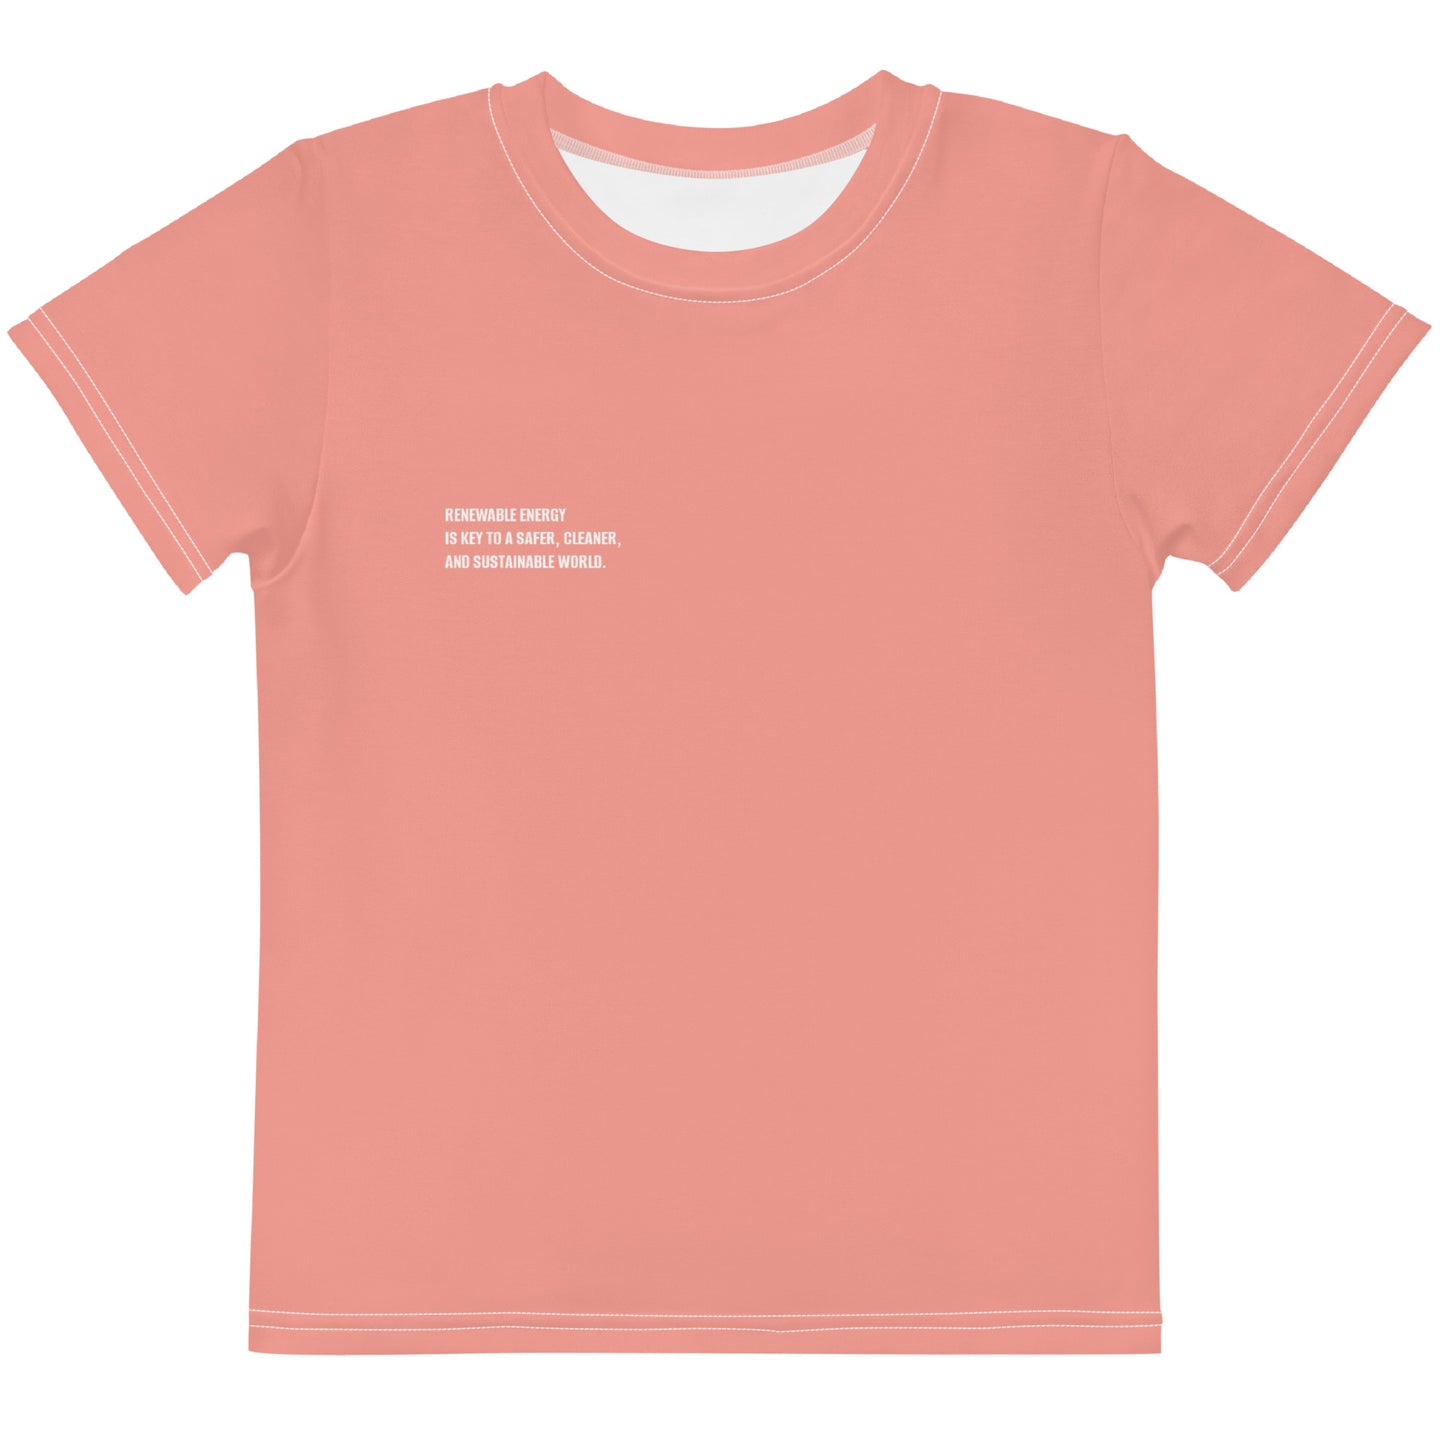 Coral Pink Climate Change Global Warming Statement - Sustainably Made Kids crew neck t-shirt